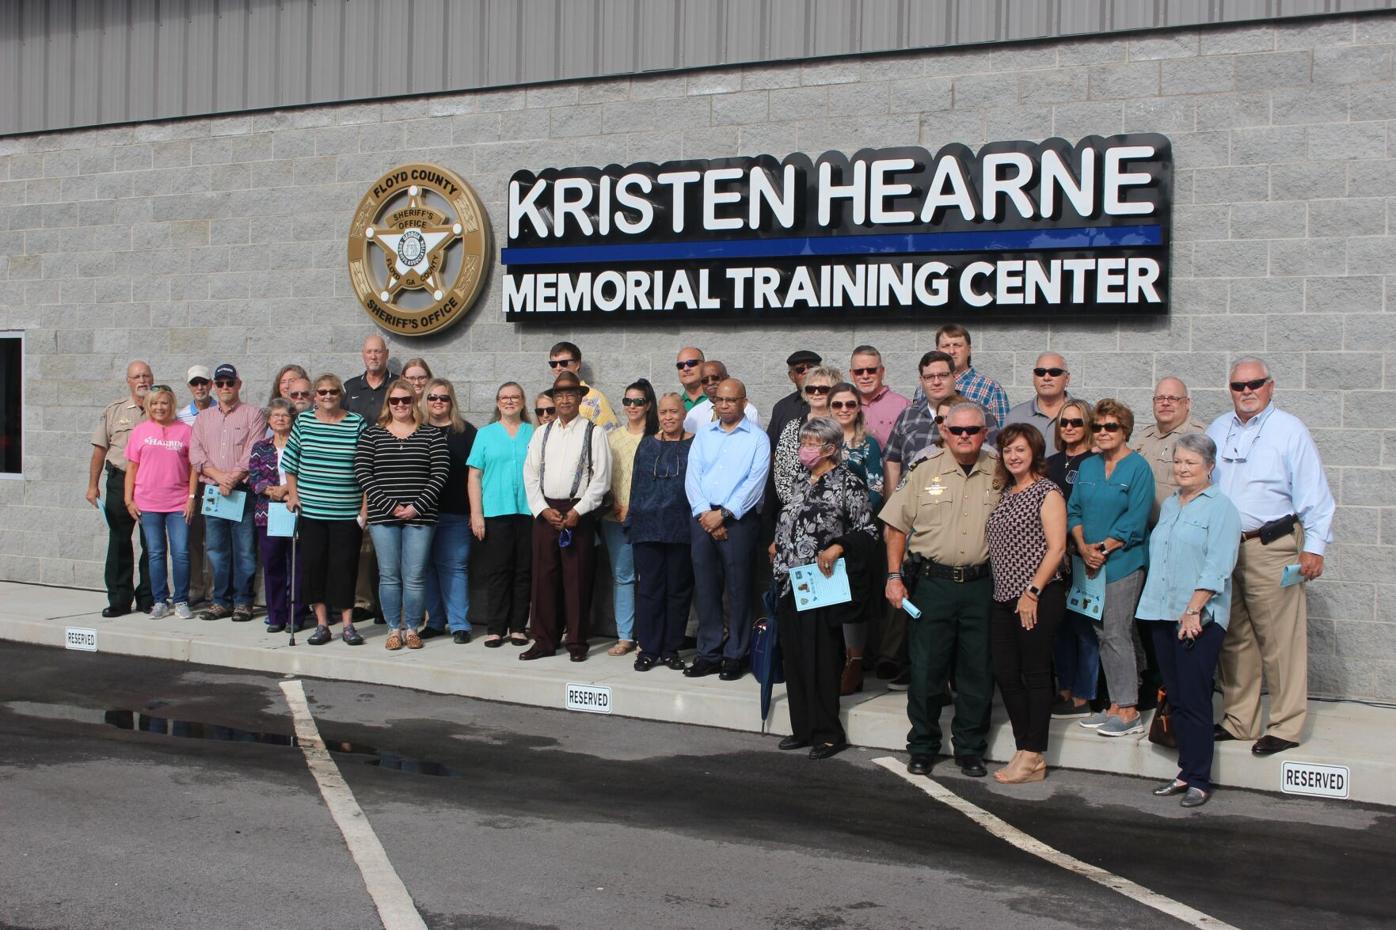 Sheriff's Office officially dedicates training center to Kristen Hearne, celebrates Wall of Honor